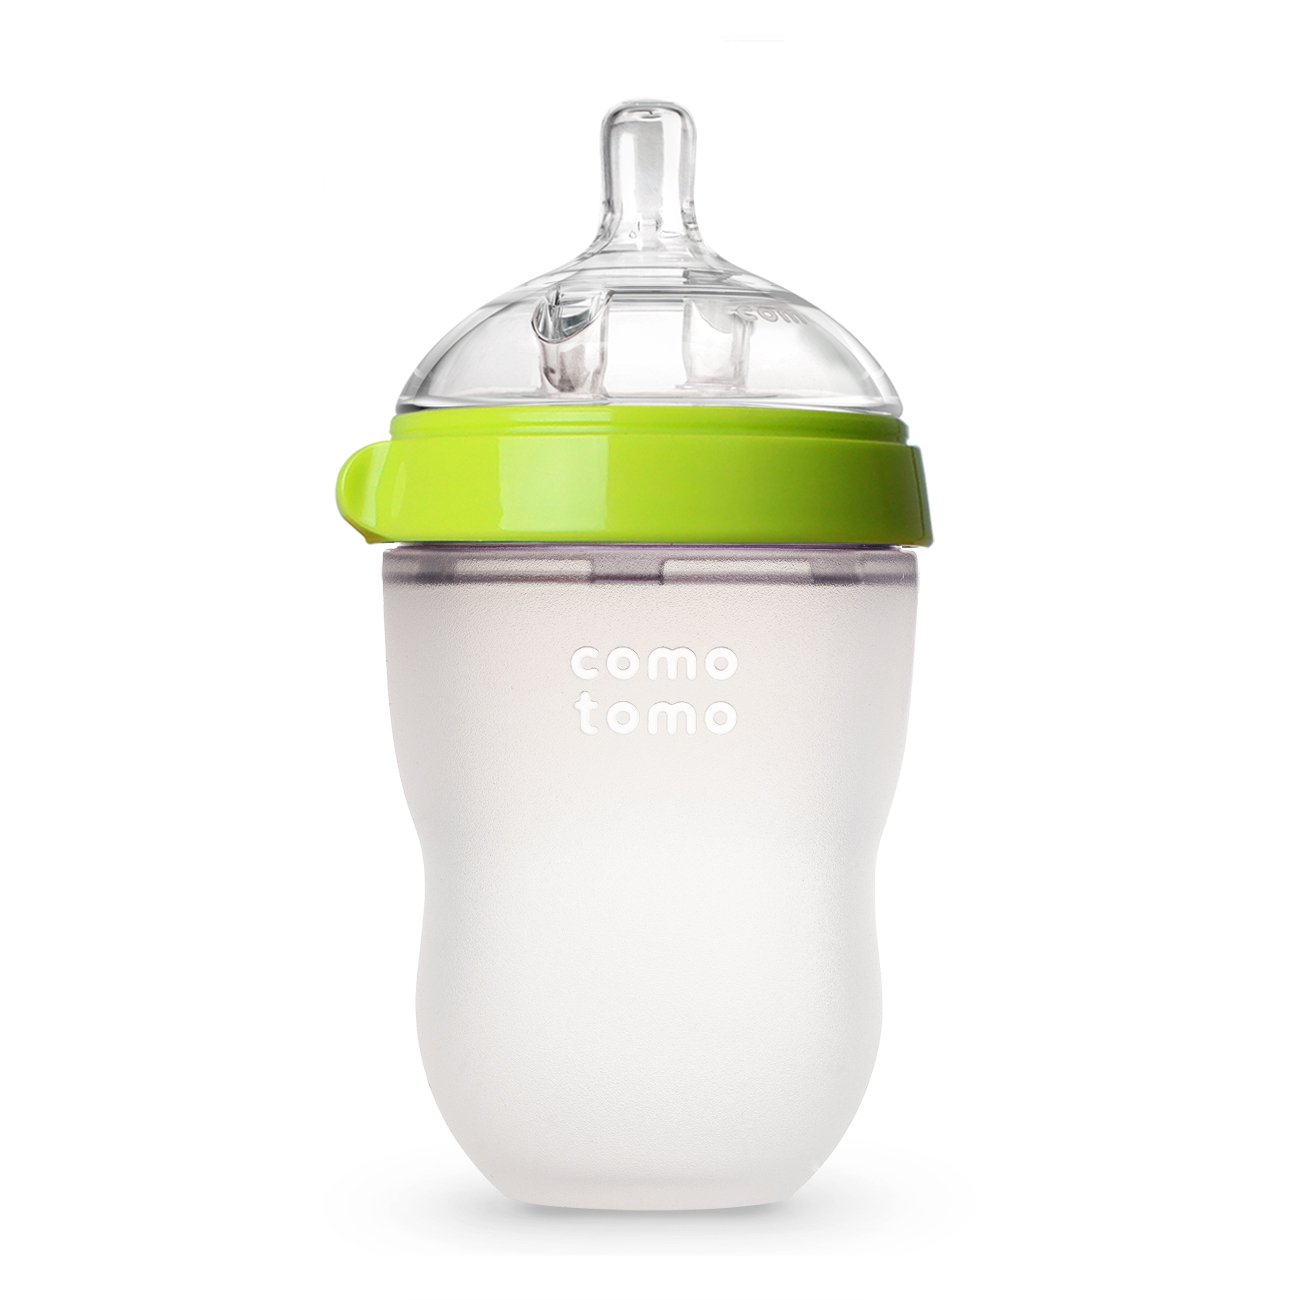 Top 4 Best Natural Baby Bottles Reviews in 2023 1